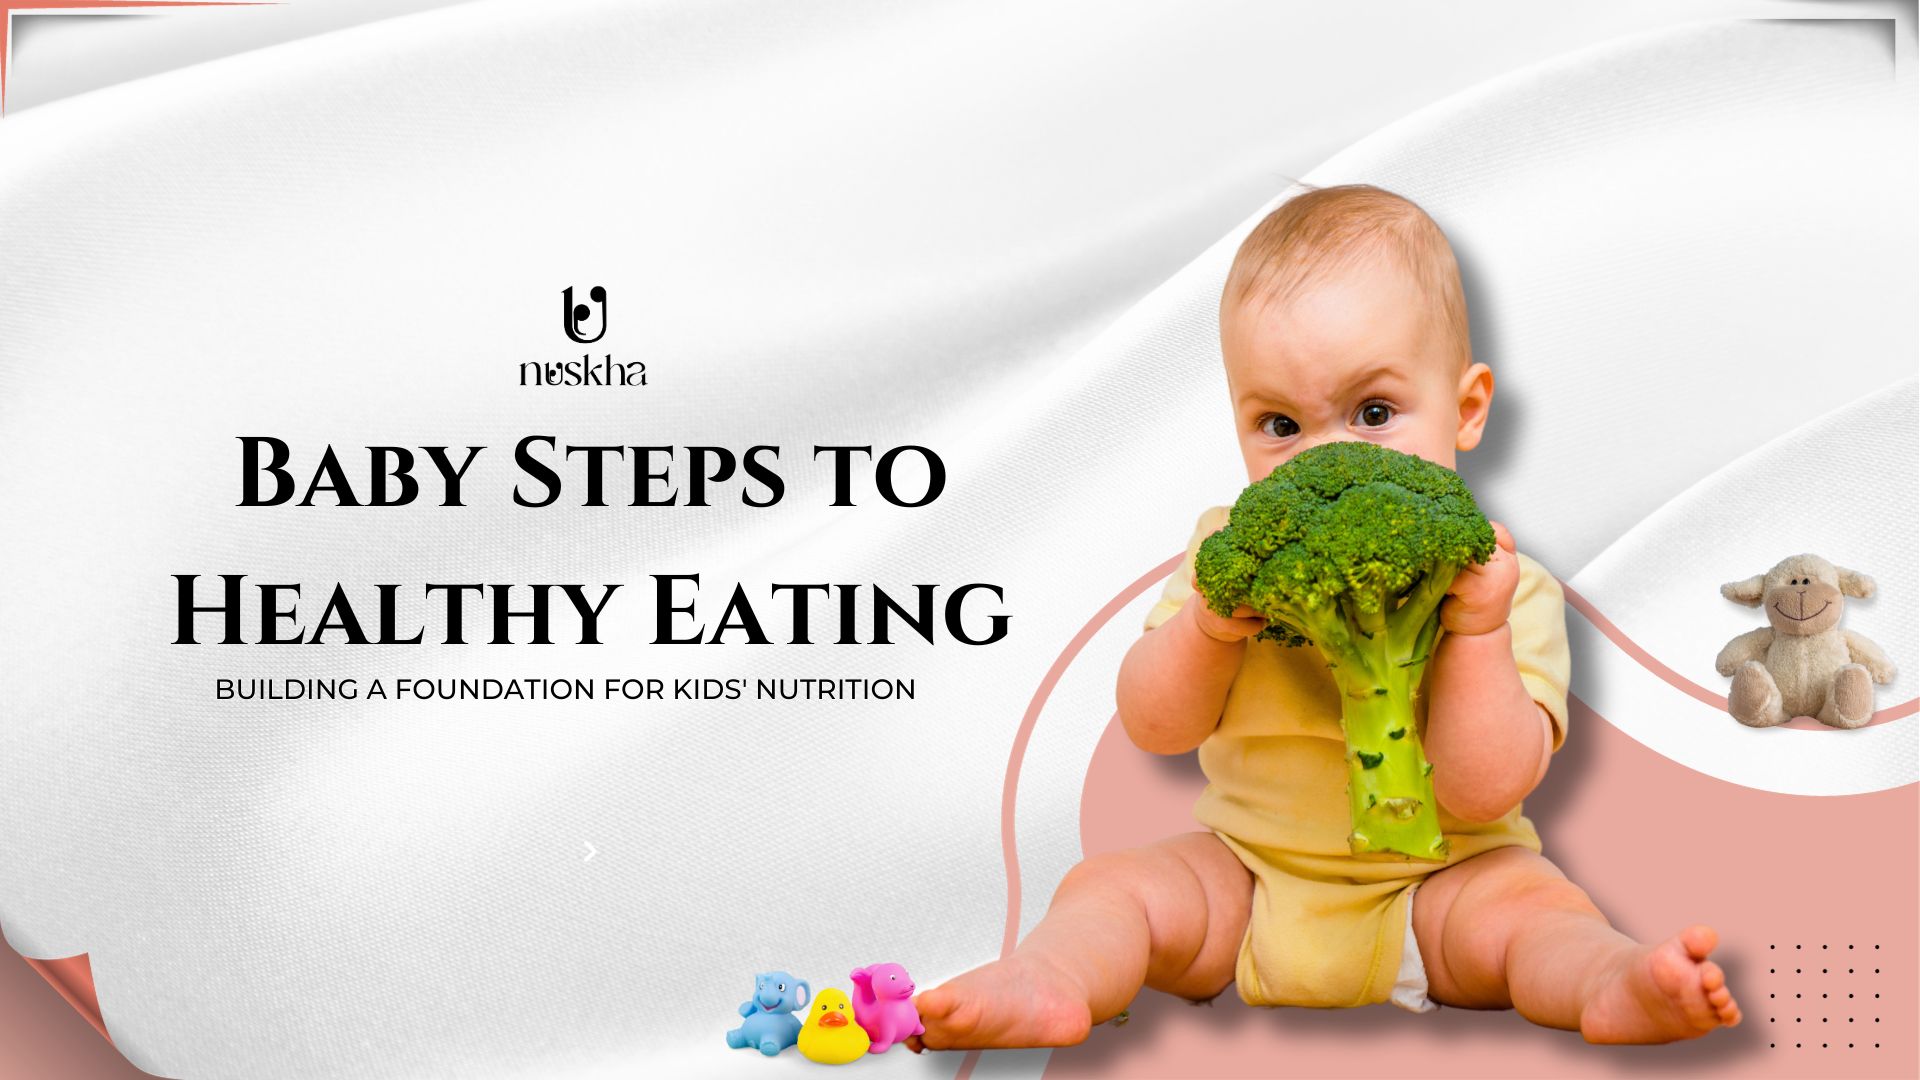 Baby Steps to Healthy Eating: Building a Foundation for Kids' Nutrition